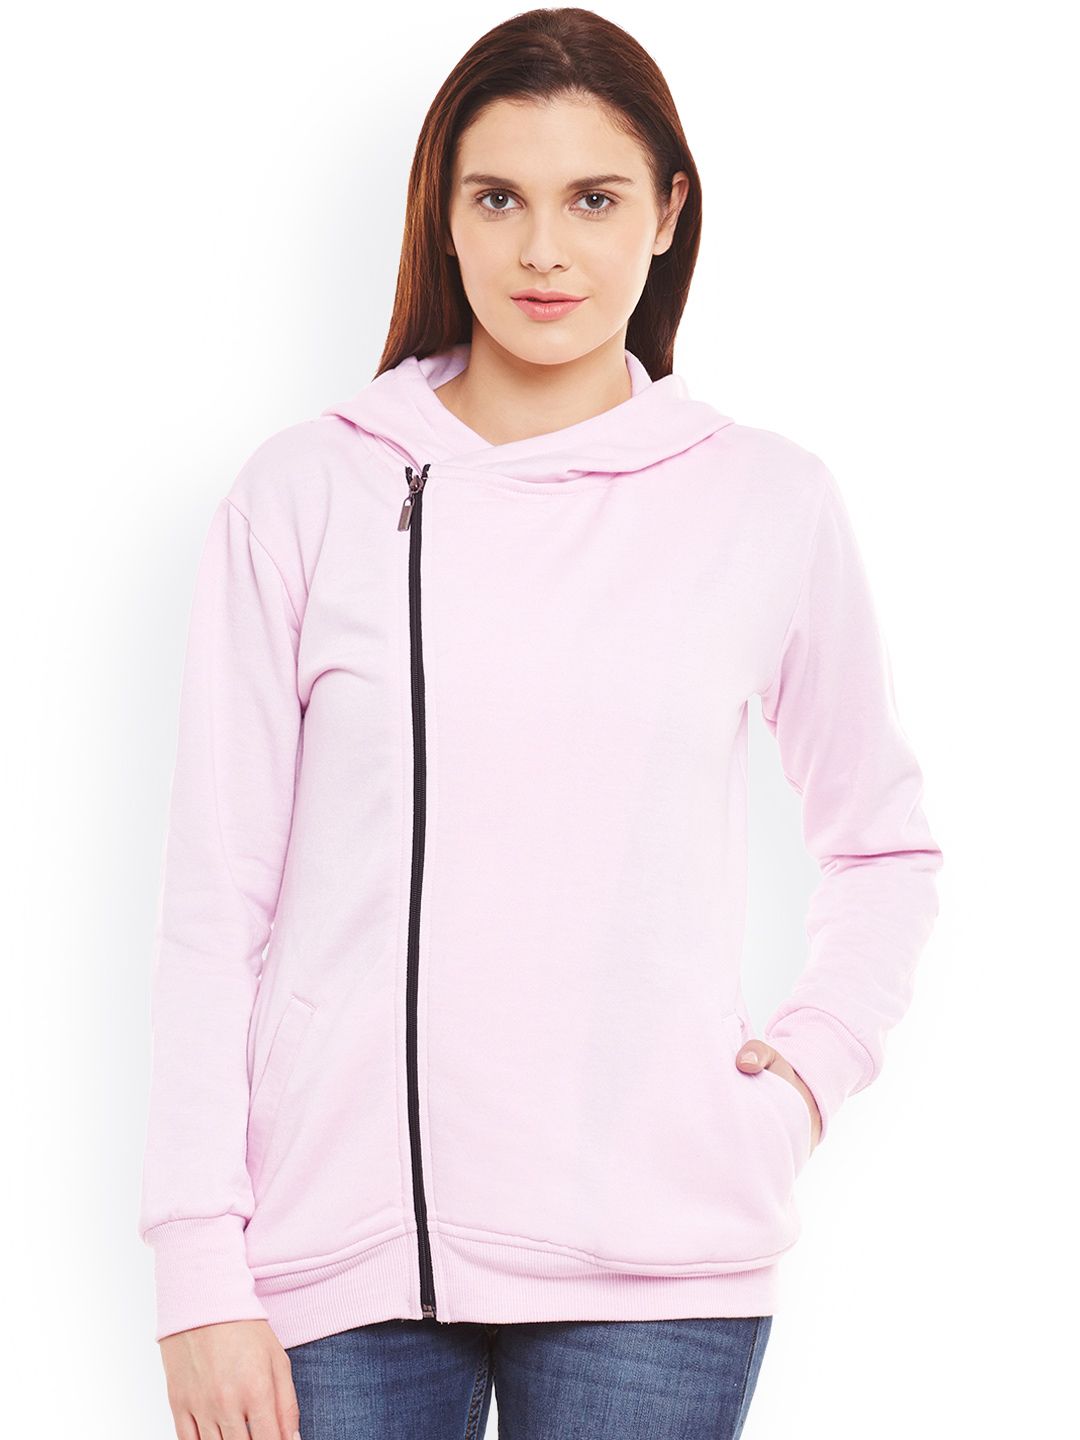 Belle Fille Pink Hooded Jacket Price in India